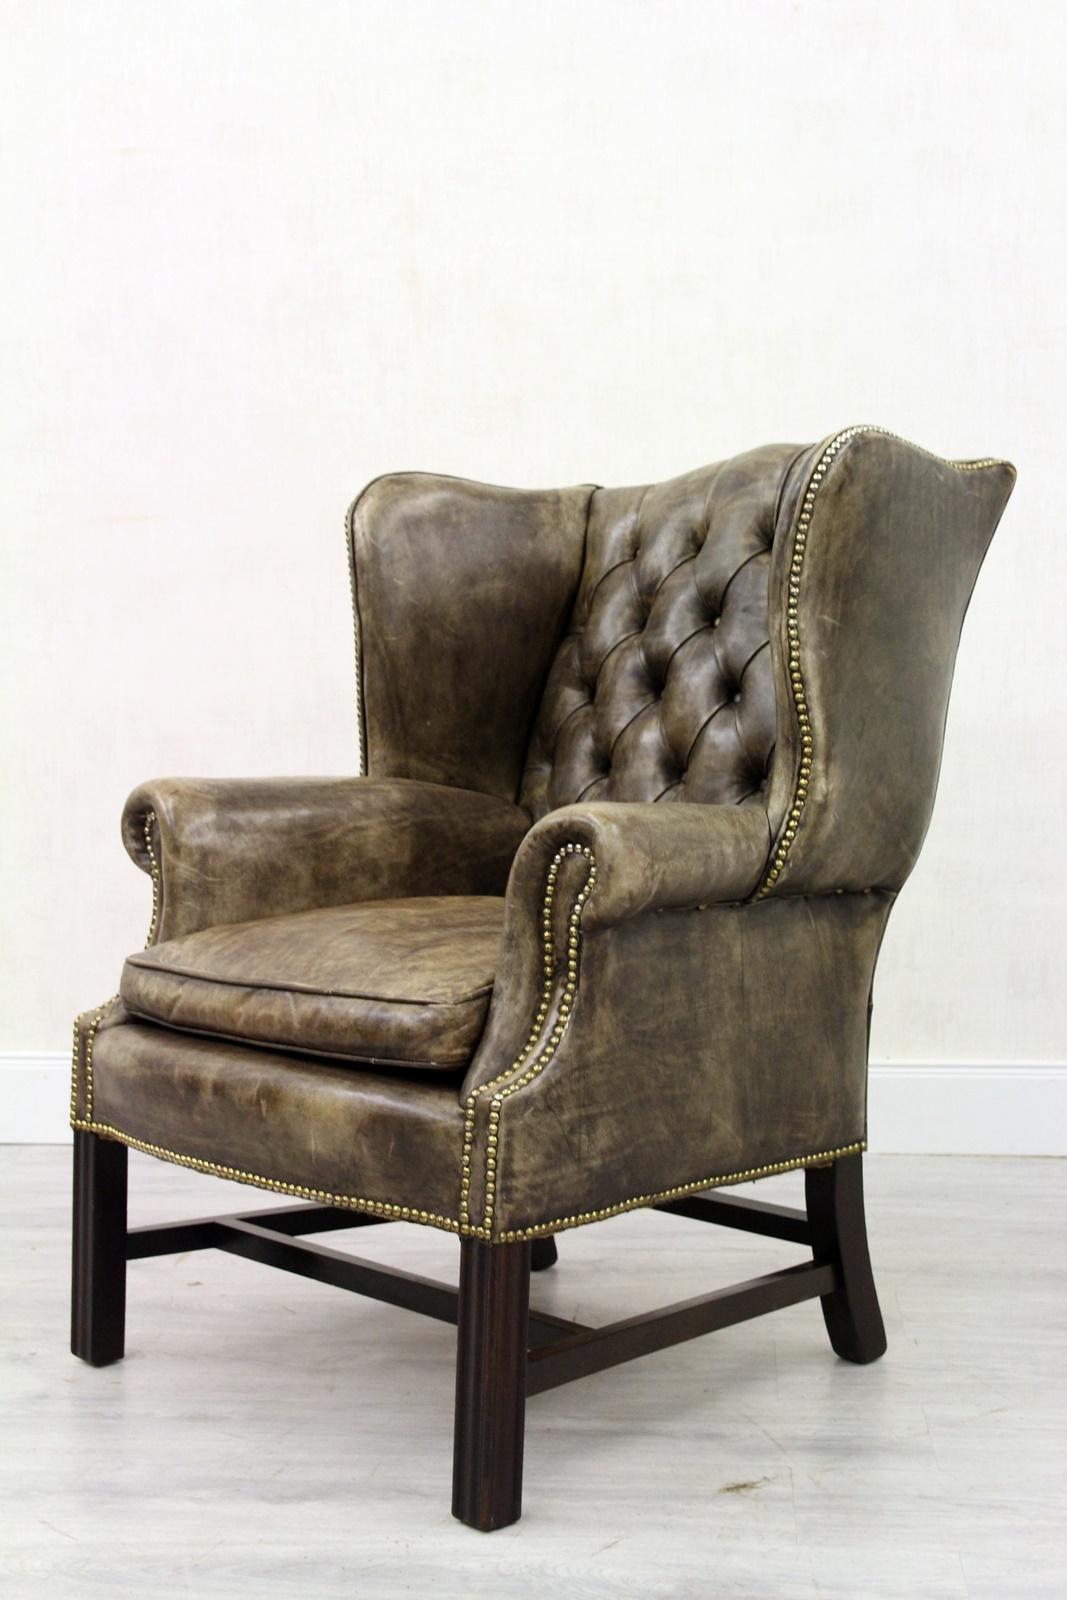 2 Chesterfield Armchair Armchair Wing Chair Antique Chair For Sale 1